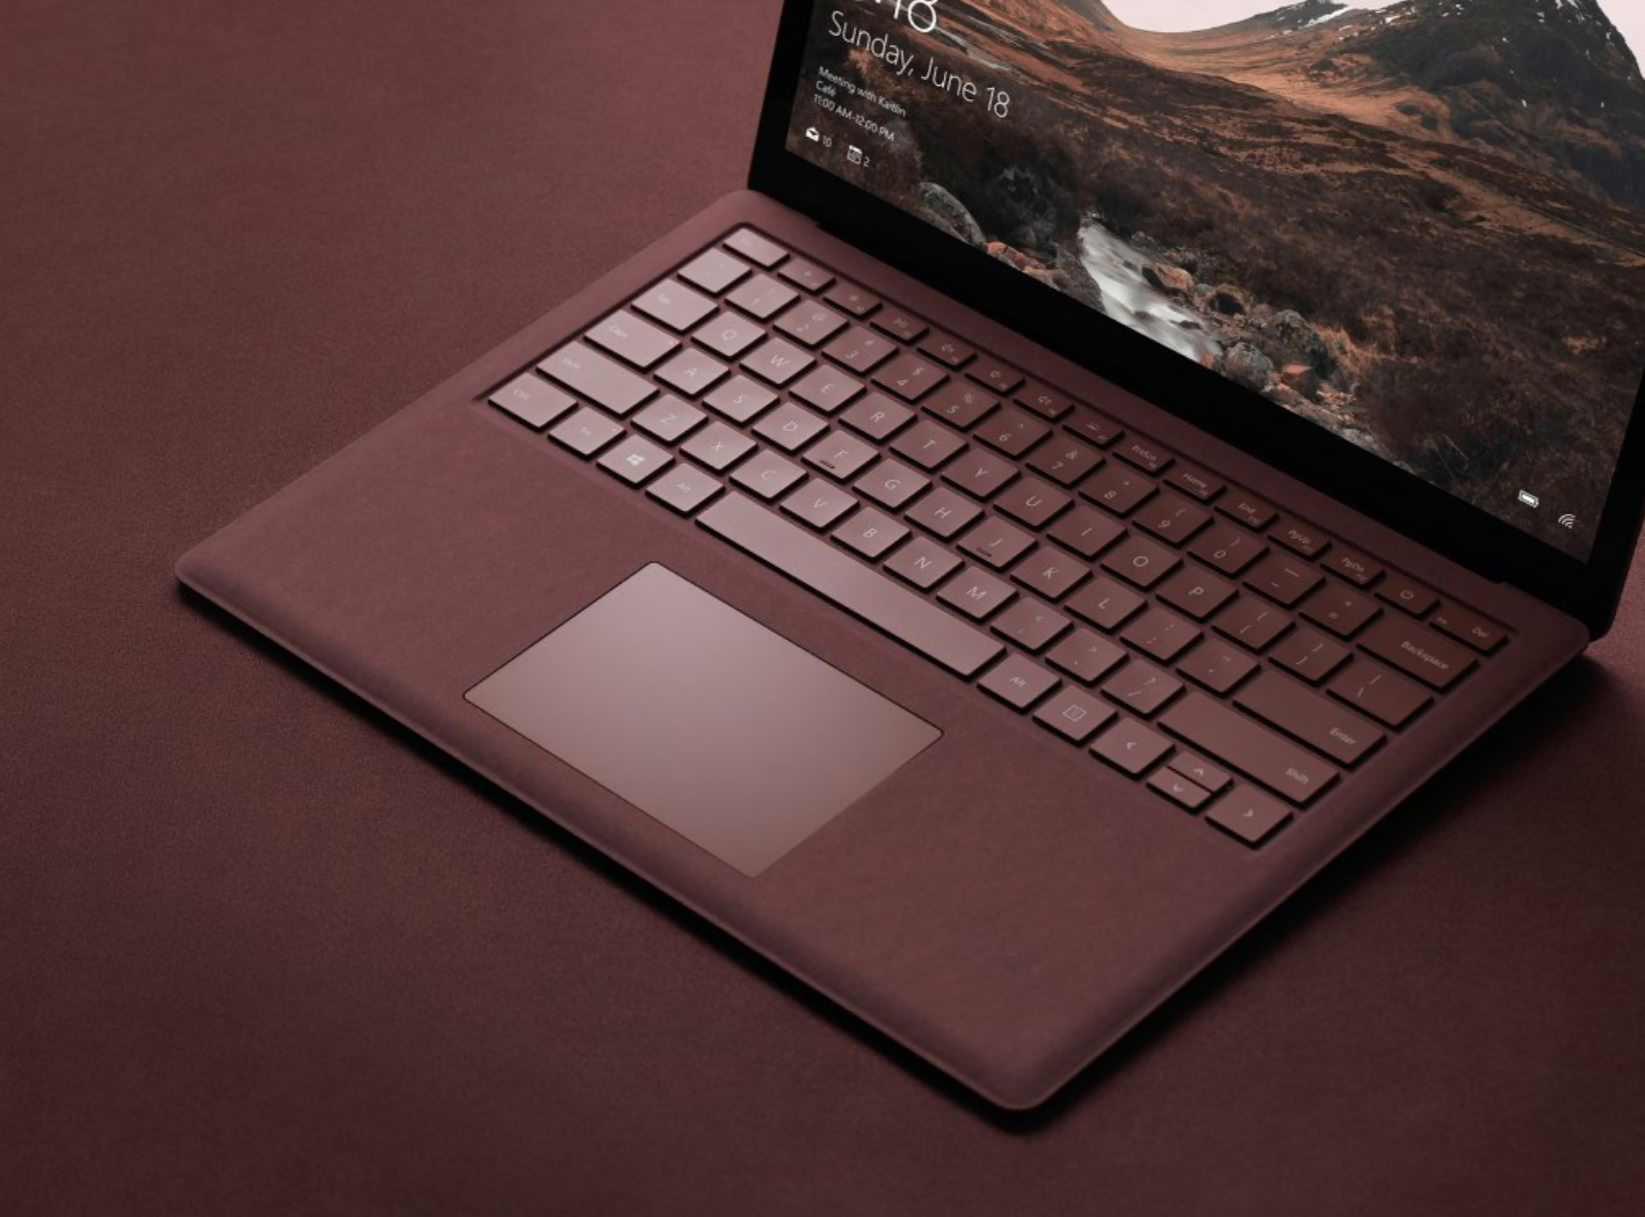 Microsoft Surface Laptop Pre-order now available here